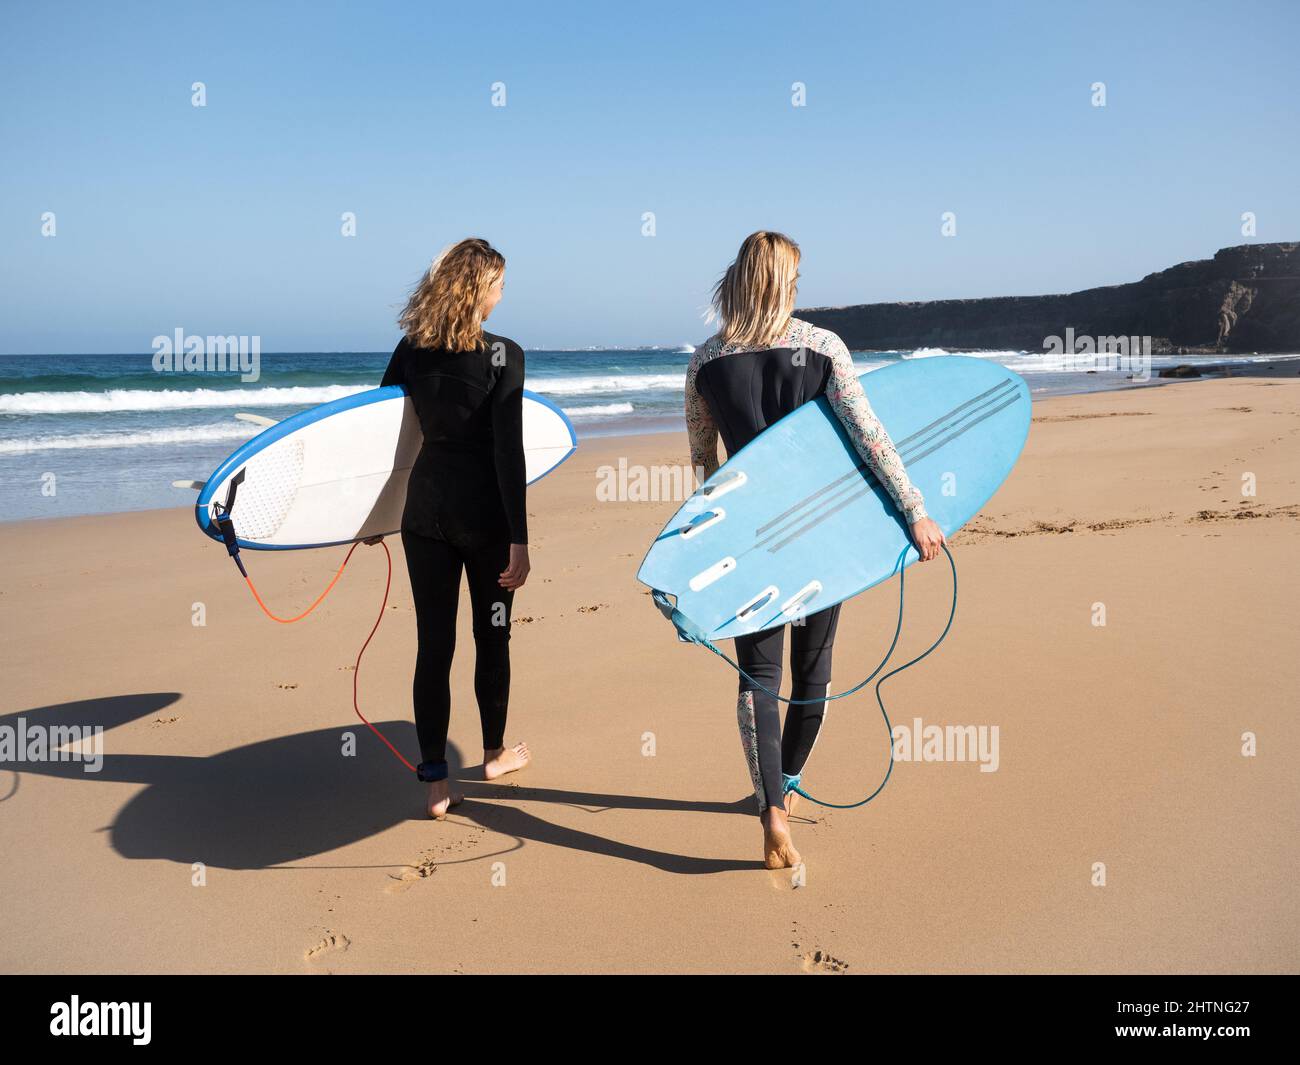 2 caucasian surfer women on the beach walking to the waves. They are wearing winter wetsuits. Stock Photo